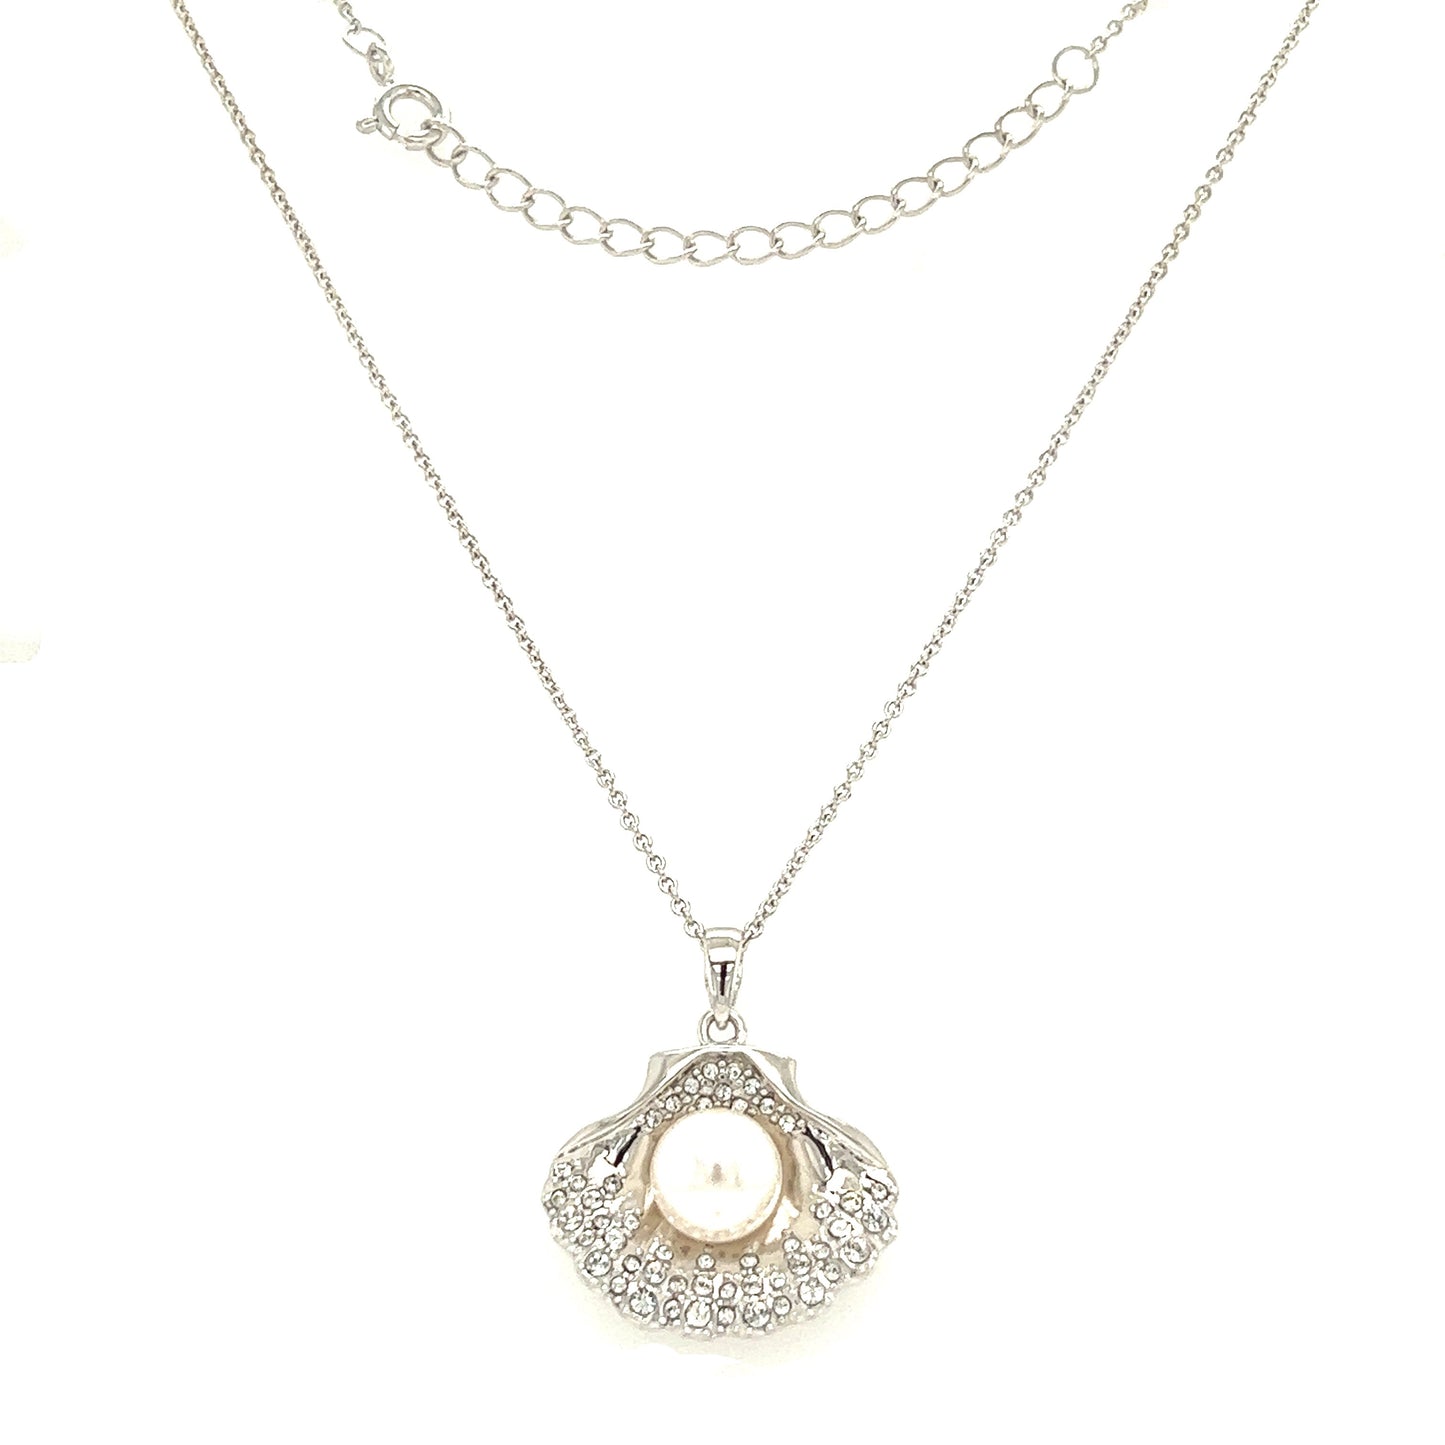 Scallop Shell Necklace with White Pearl and White Crystals in Sterling Silver Full Necklace Front View